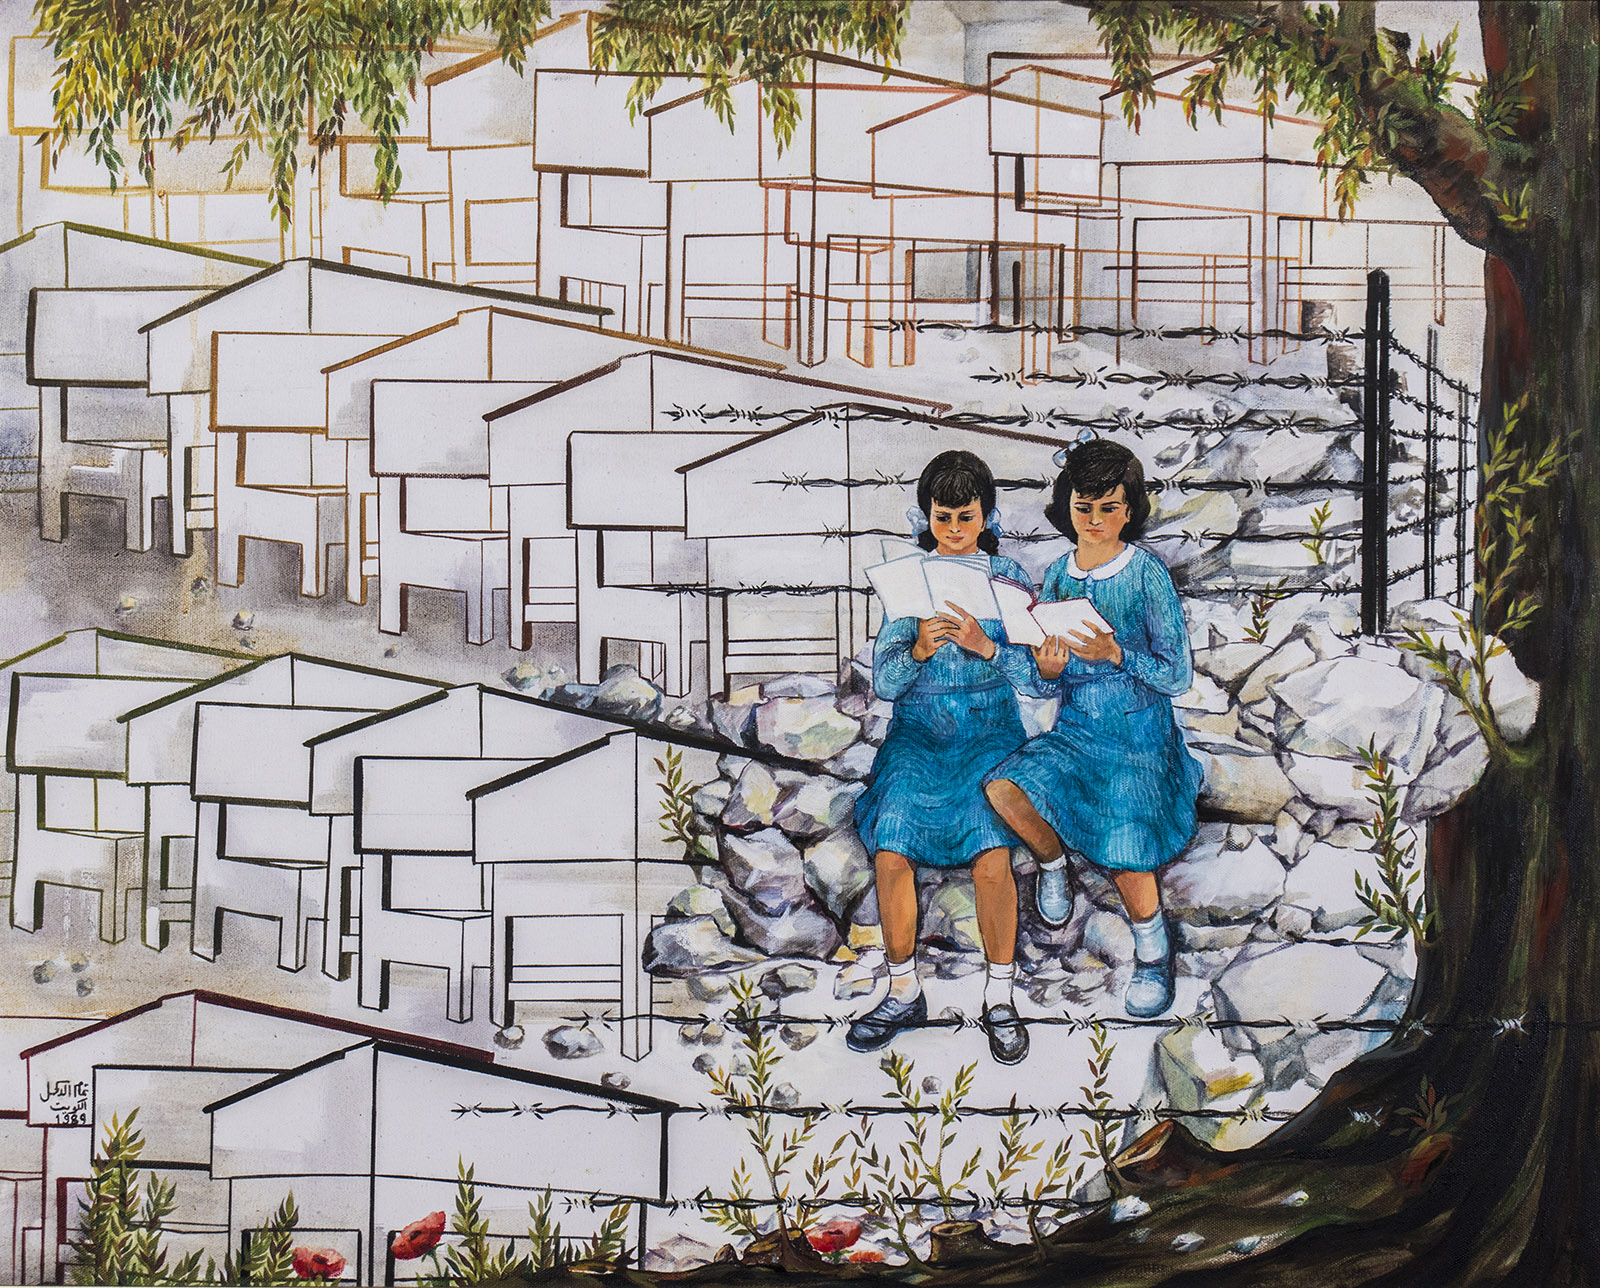 A drawing of two girls in blue dresses sitting on rocks amongst a landscape of barbed wire and modernist housing. They are reading books.